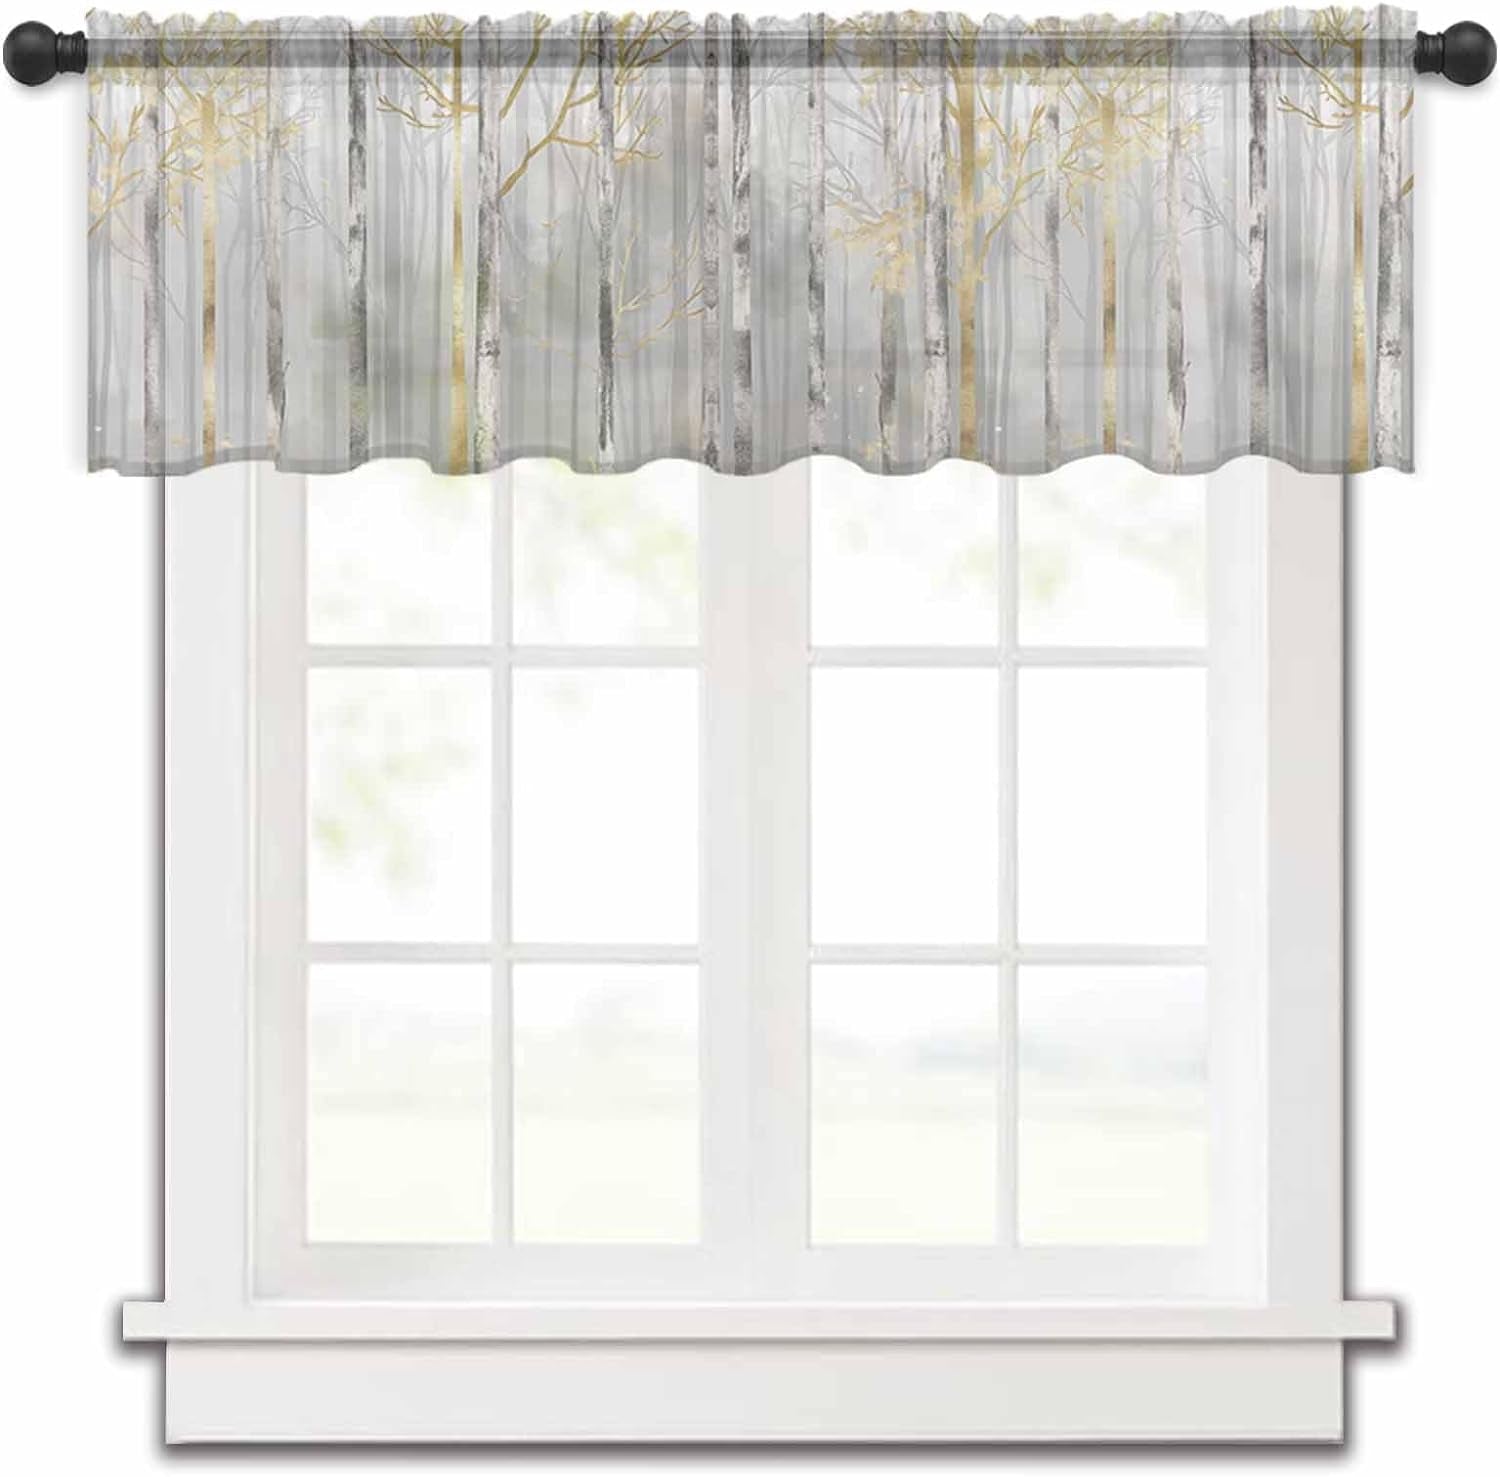 Abstract Forest Valance Curtains for Kitchen/Living Room/Bathroom/Bedroom Window,Rod Pocket Small Topper Half Short Window Curtains Voile Sheer Scarf, Modern Landscape Painting Grey Gold 42"X18"